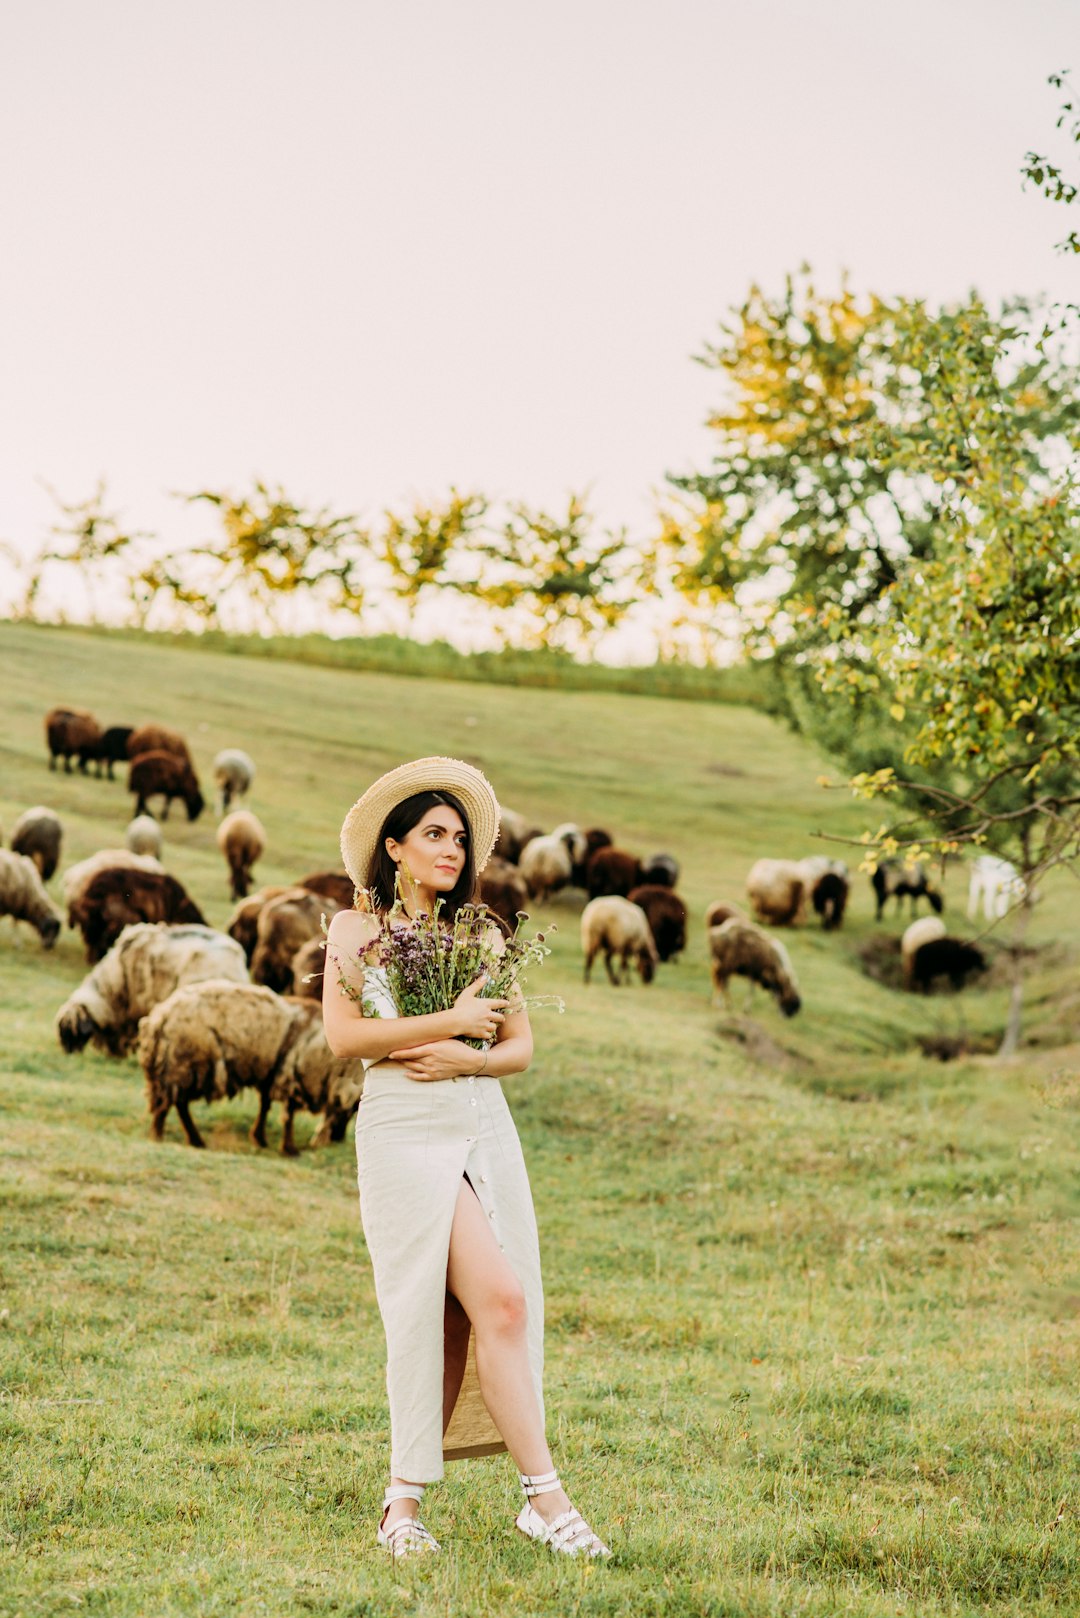 woman in white pants standing on green grass field with sheep during daytime